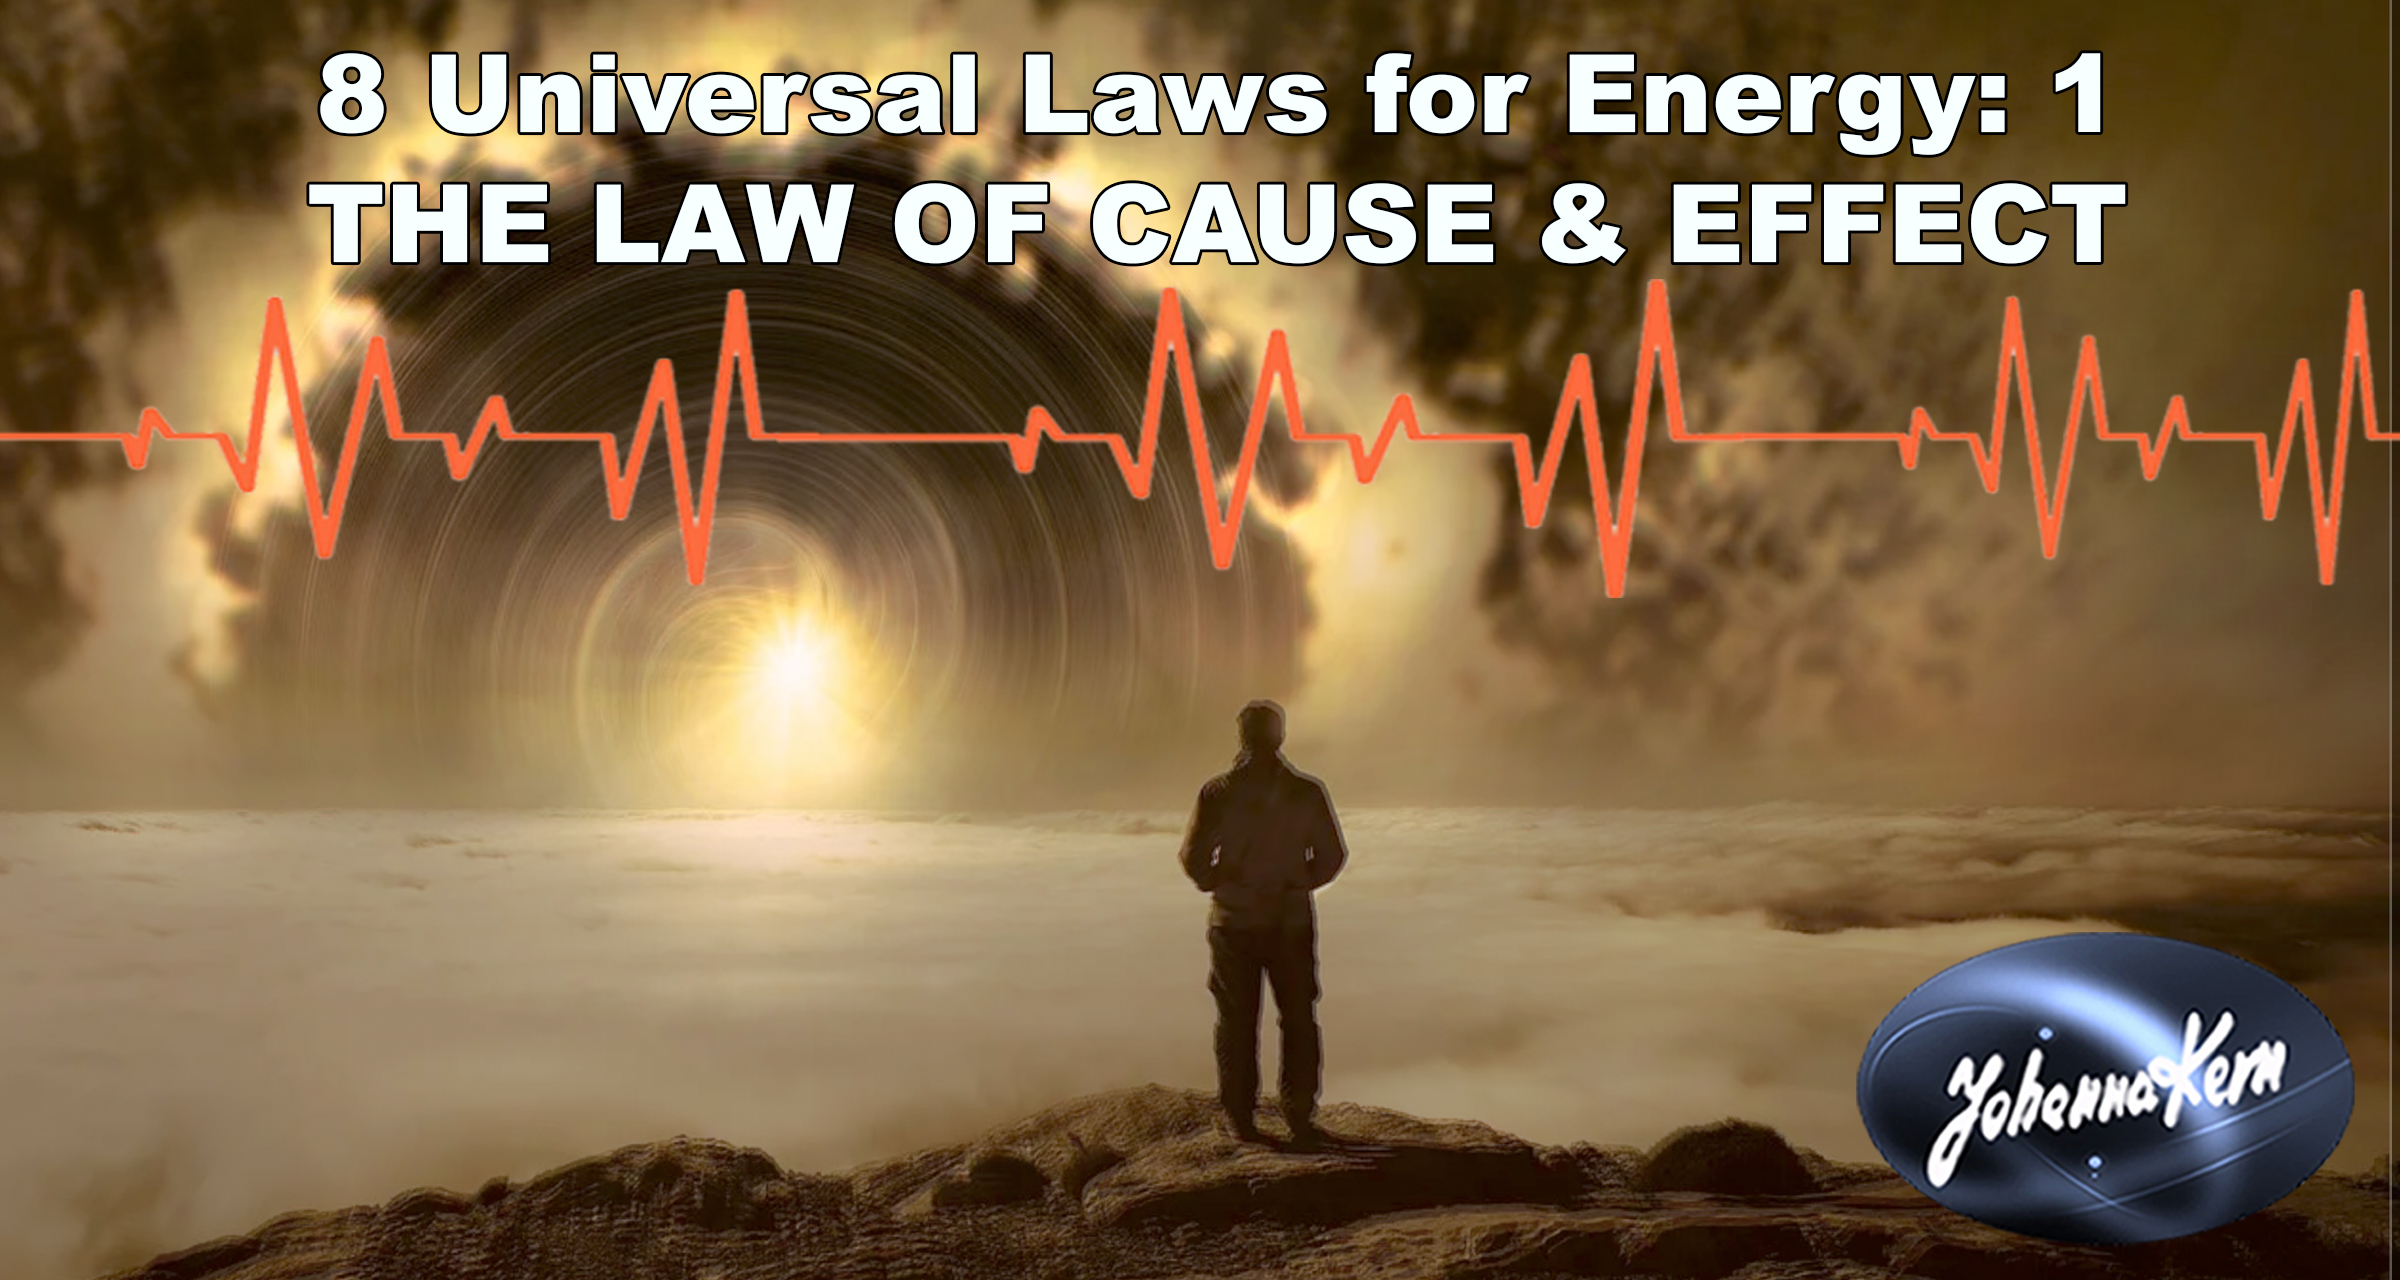 The Law Of Cause & Effect in the field of Energy